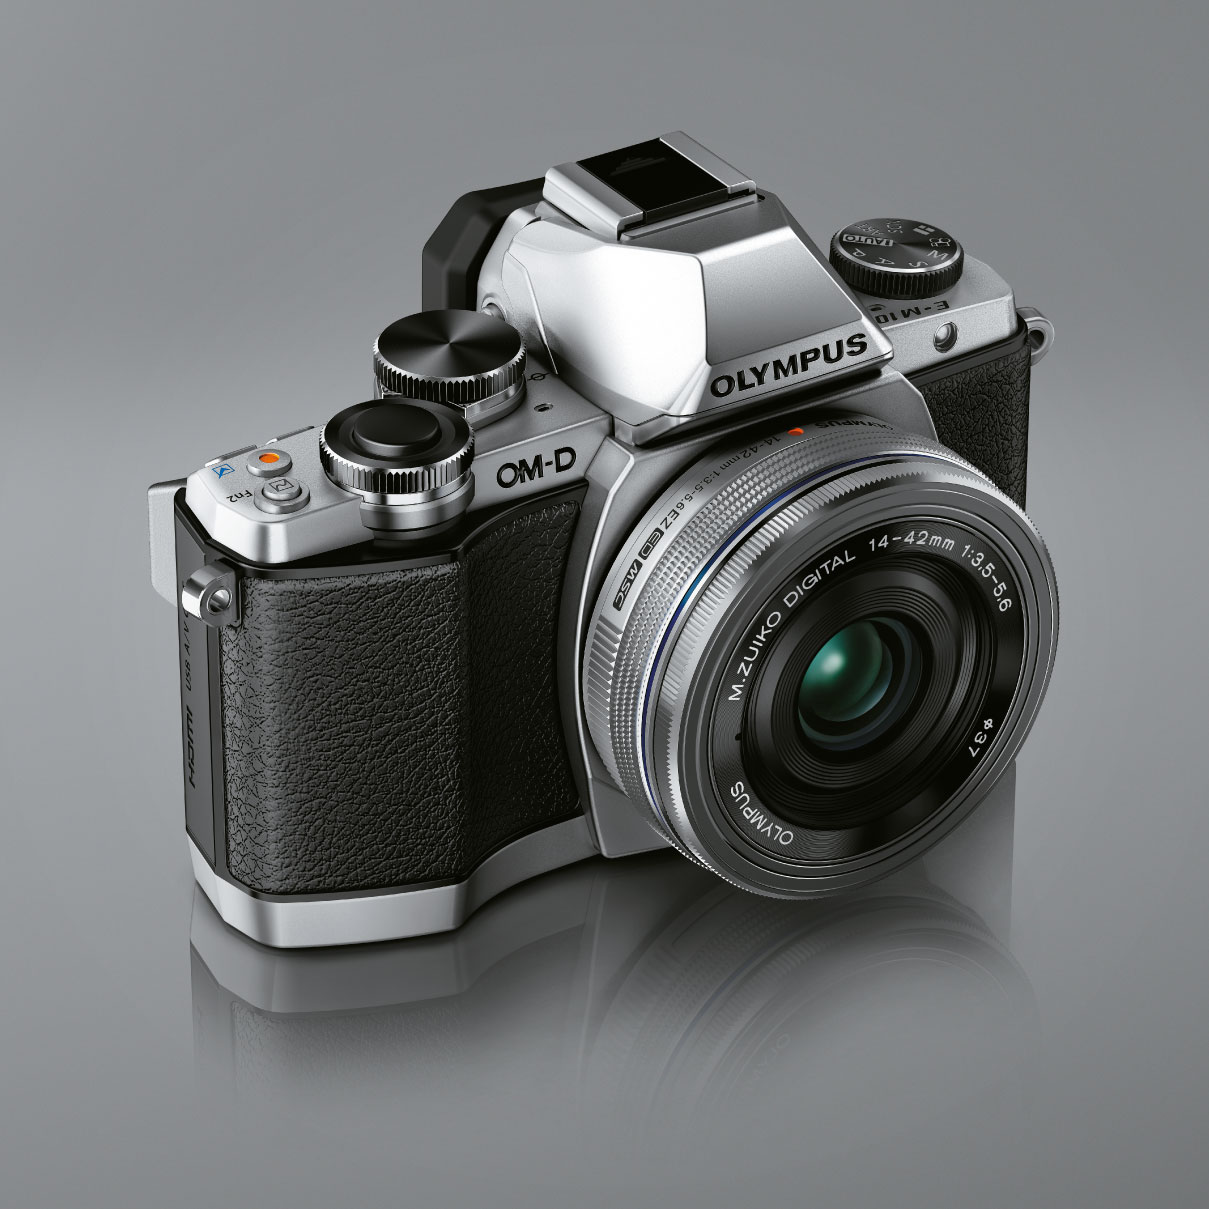 Olympus Product Announcements: OM-D E-M10, 14-42mm Pancake Zoom Lens